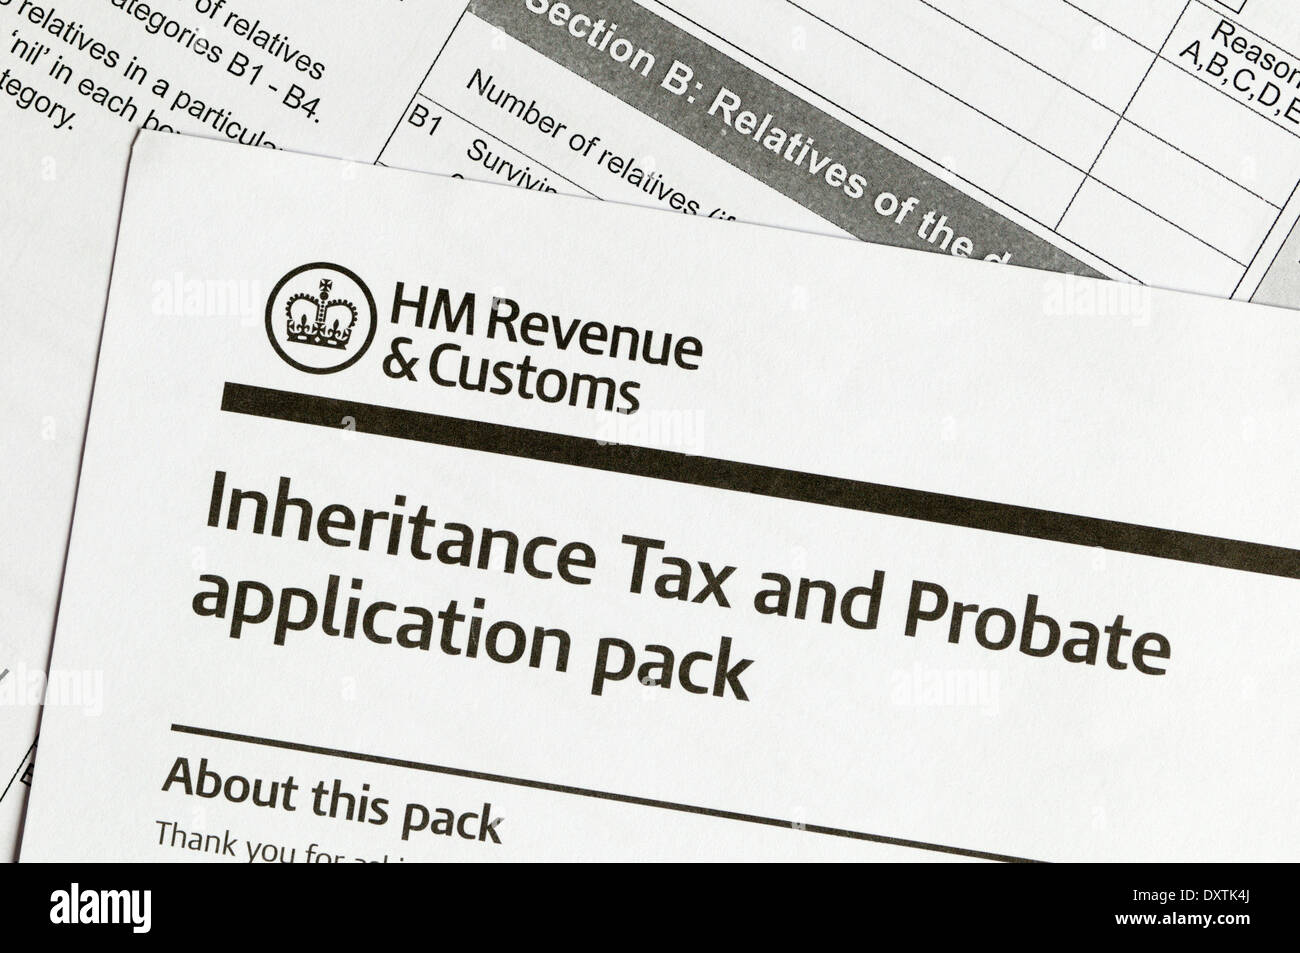 HM Revenue & Customs Inheritance Tax and Probate application pack. Stock Photo